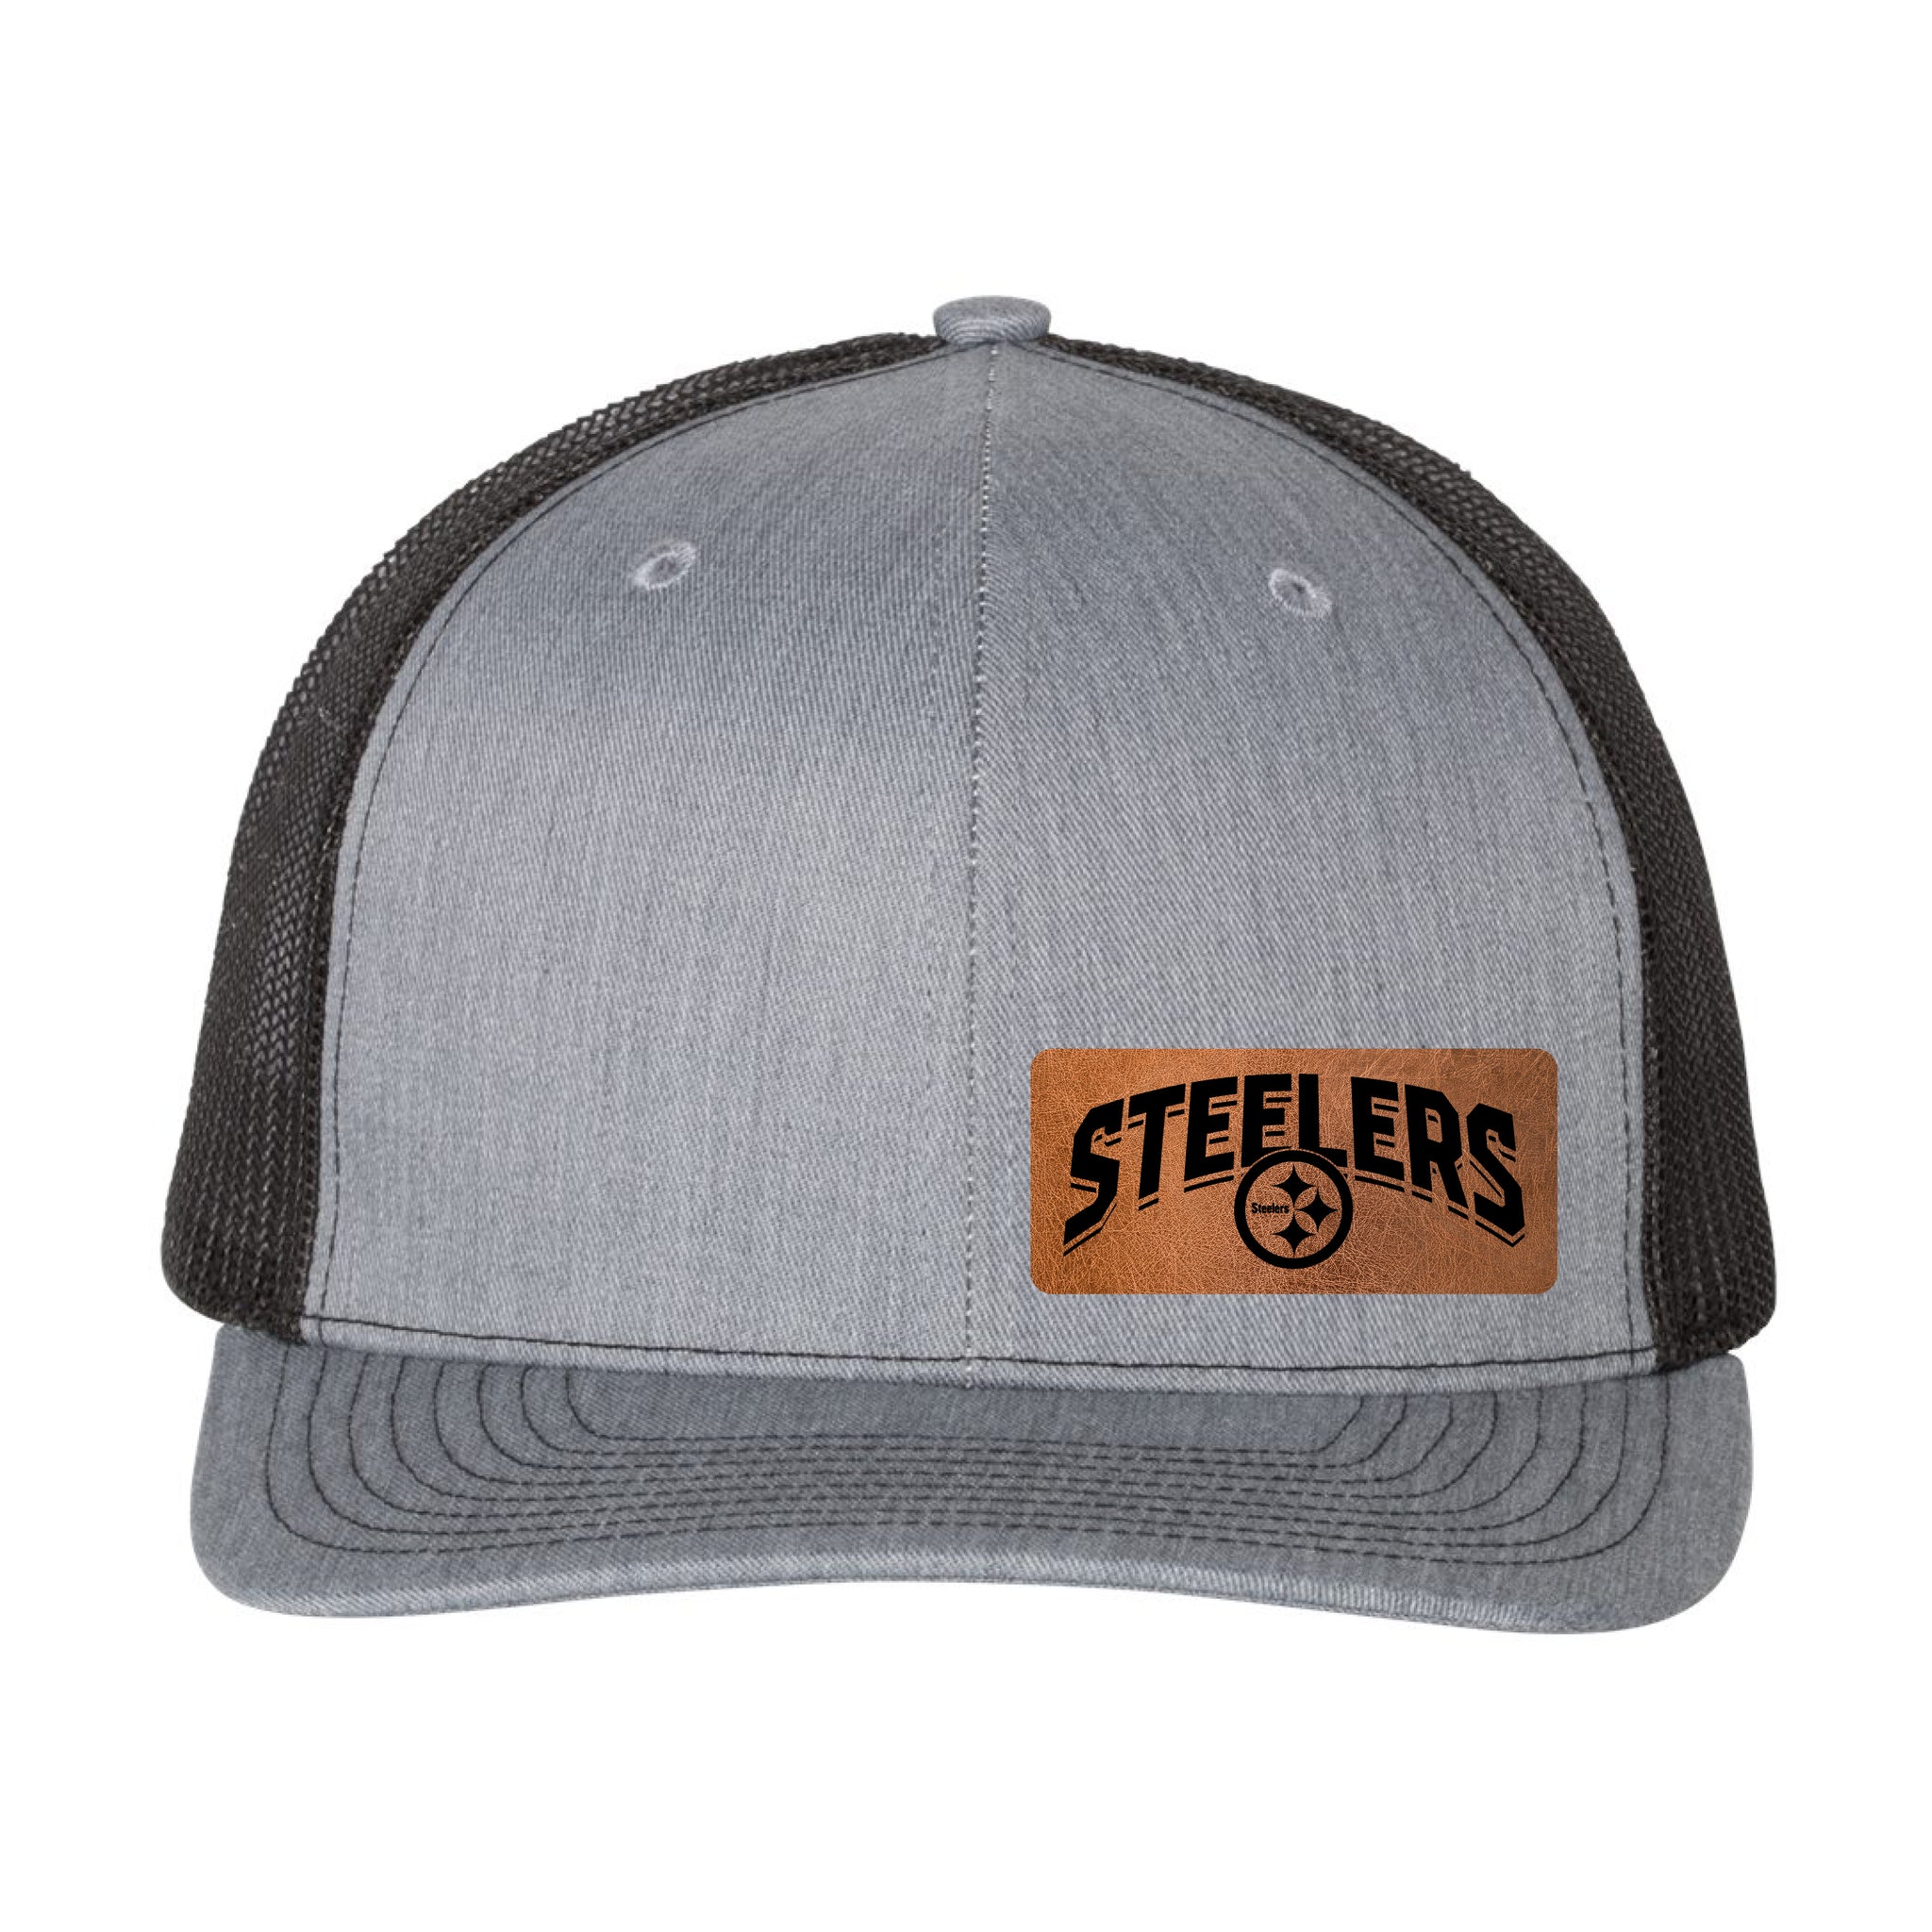 steelers leather hats